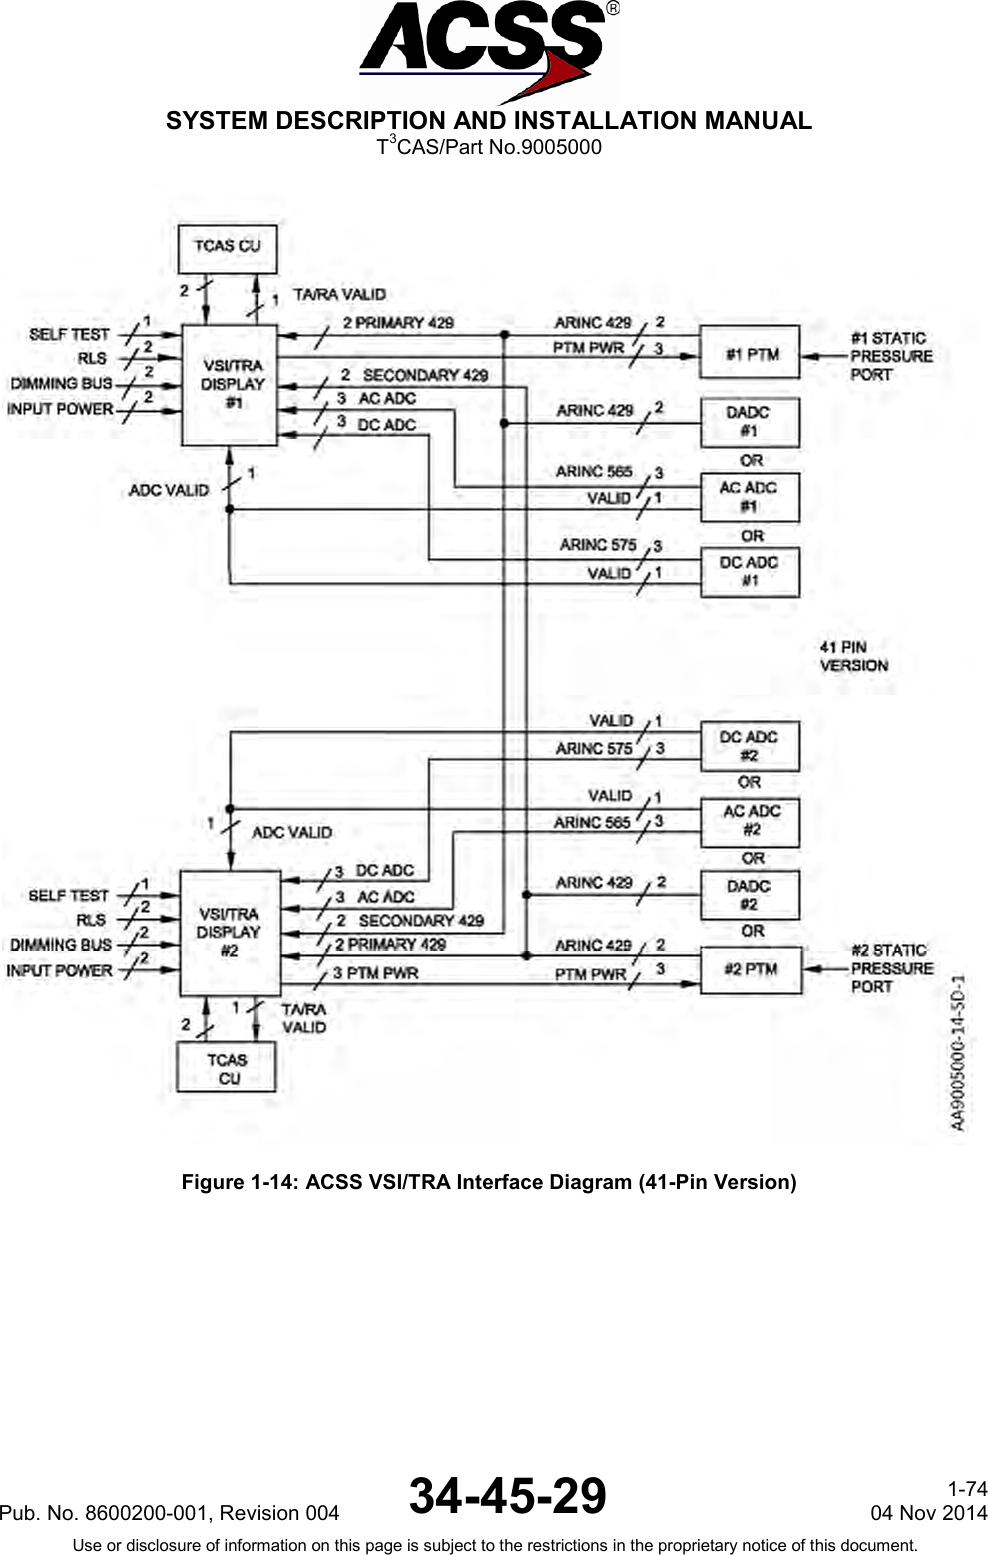  SYSTEM DESCRIPTION AND INSTALLATION MANUAL T3CAS/Part No.9005000  Figure 1-14: ACSS VSI/TRA Interface Diagram (41-Pin Version) Pub. No. 8600200-001, Revision 004 34-45-29 1-74 04 Nov 2014 Use or disclosure of information on this page is subject to the restrictions in the proprietary notice of this document.  